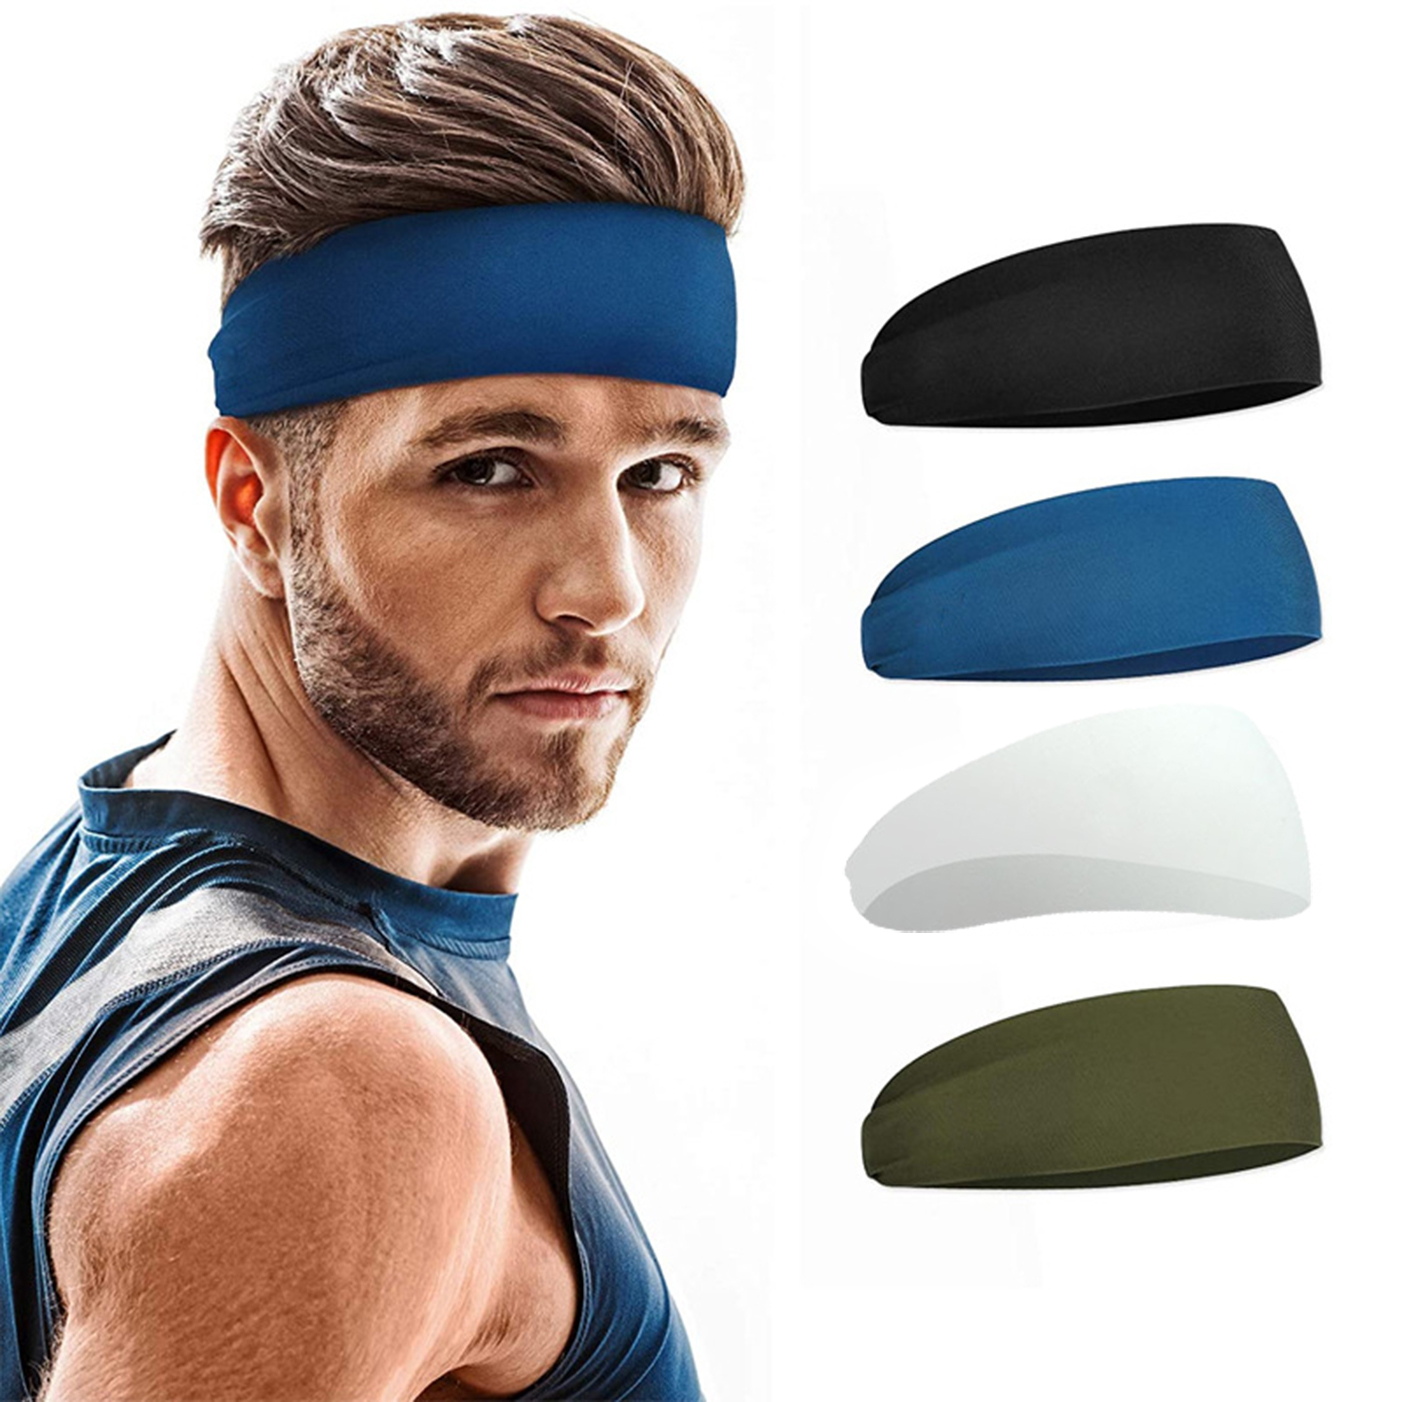 11 Different Types Of Headbands For Guys